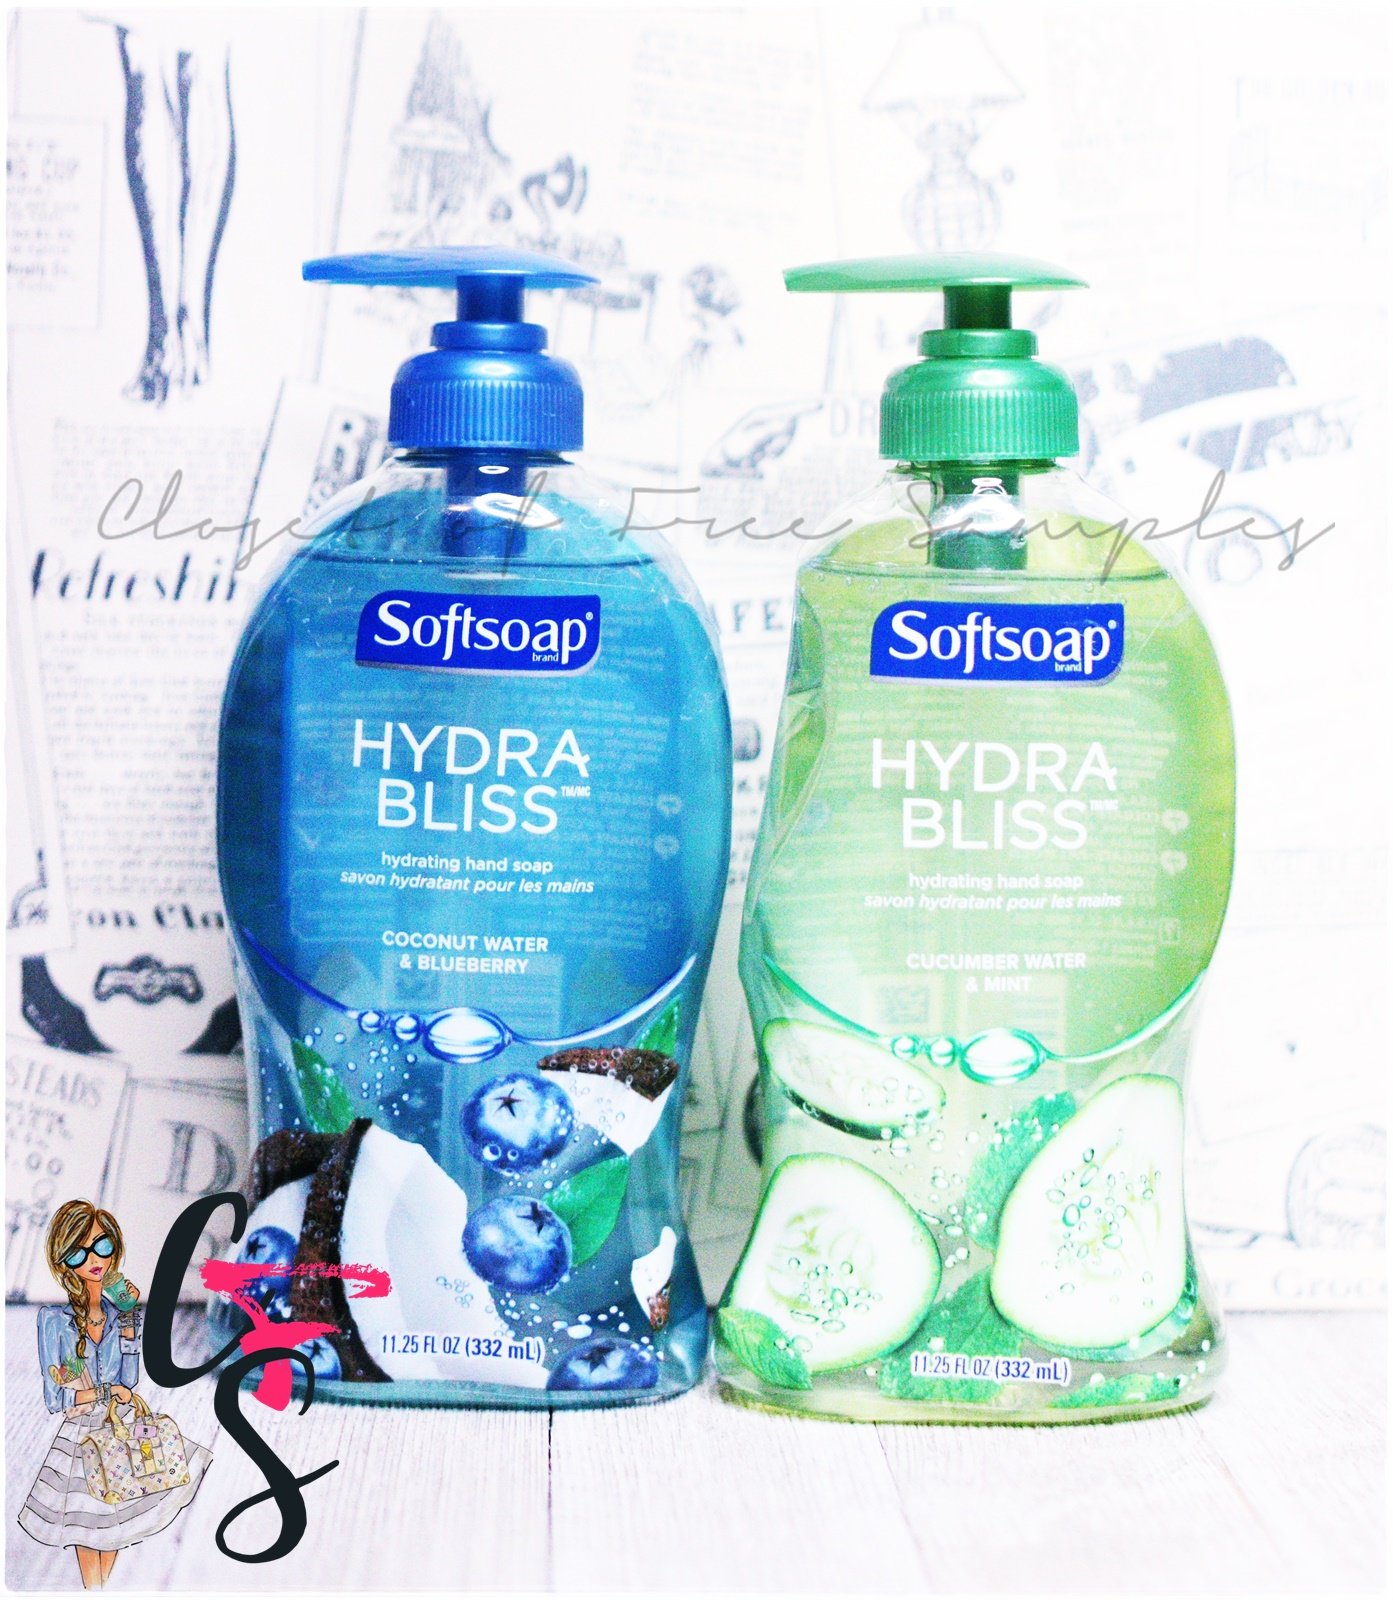 Fall in Love with Softsoap Hand Soap #Review